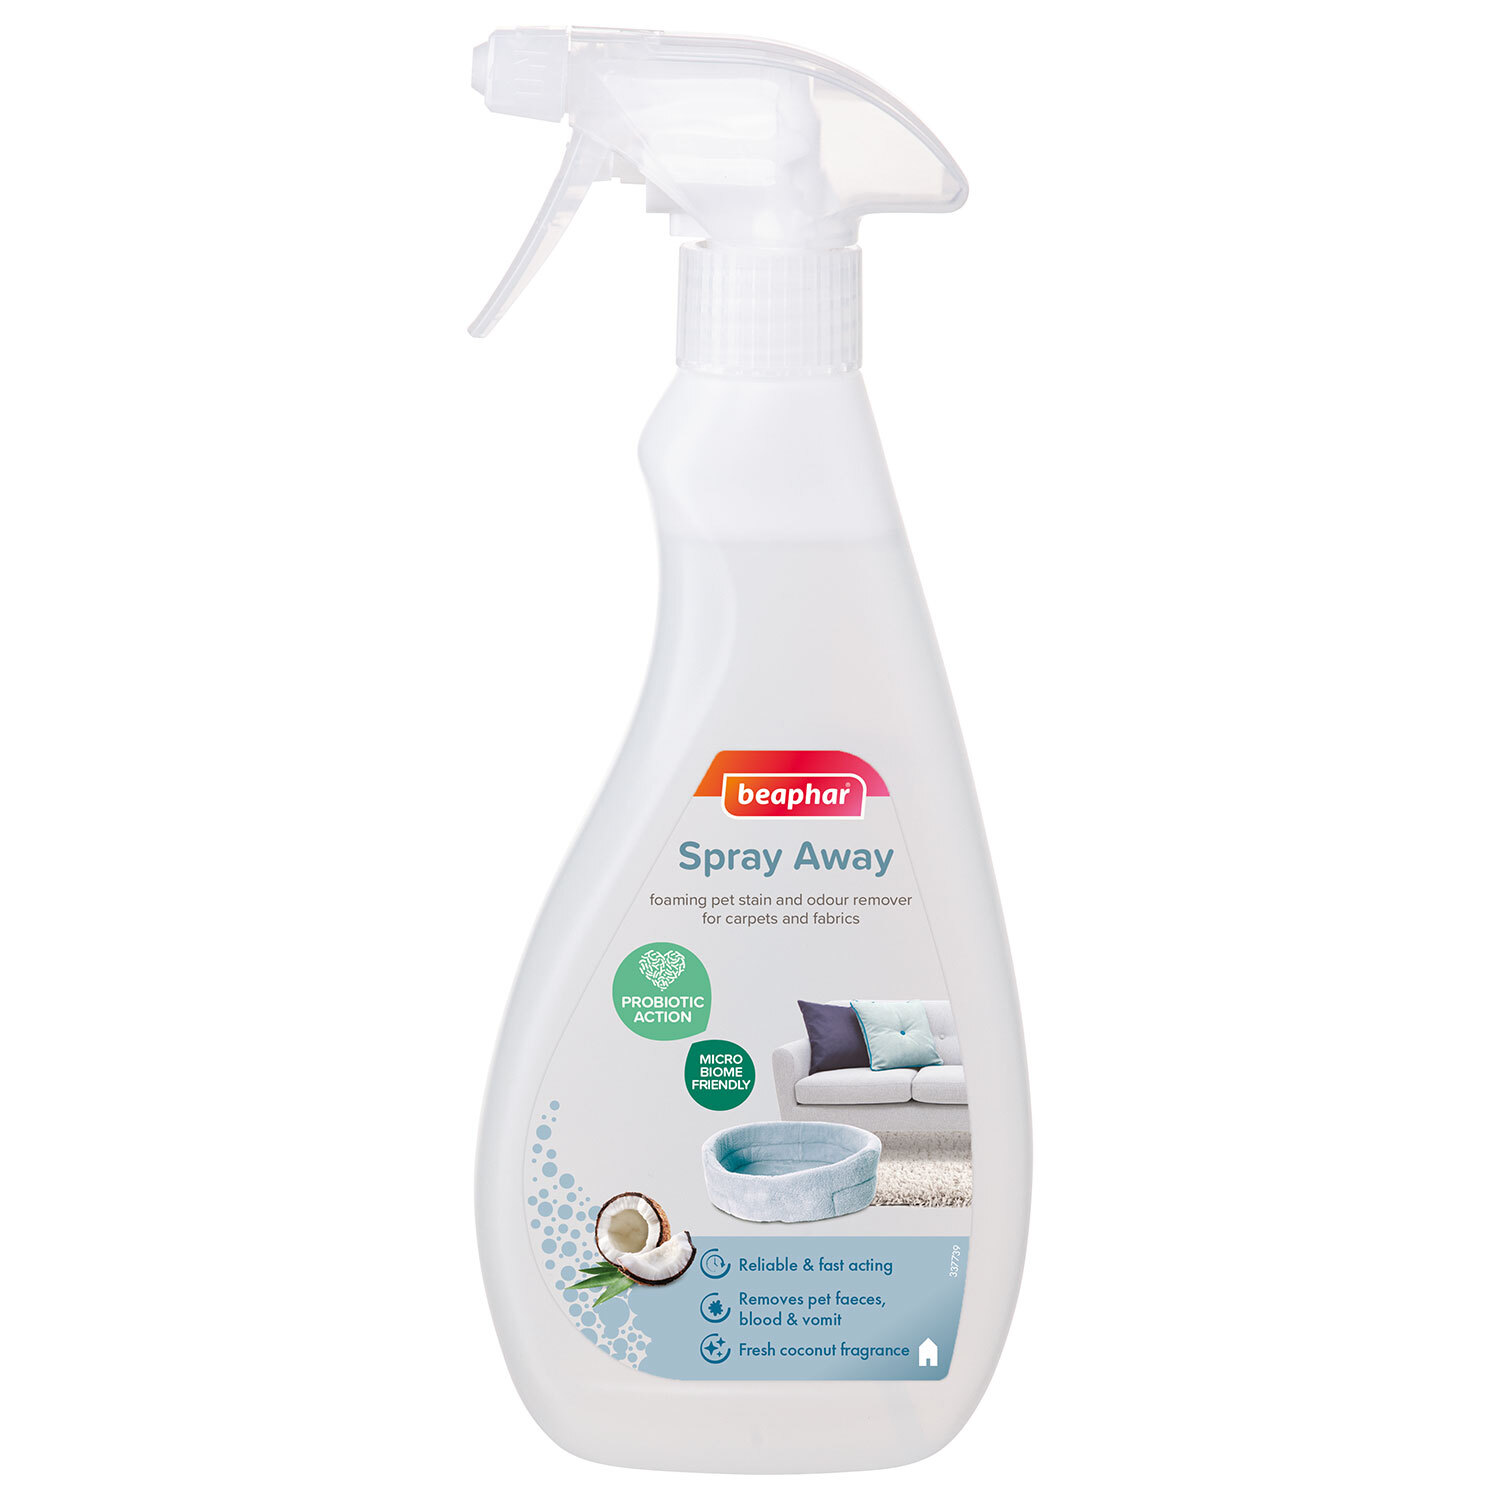 Beaphar Spray Away Pet Stain and Odour Remover Image